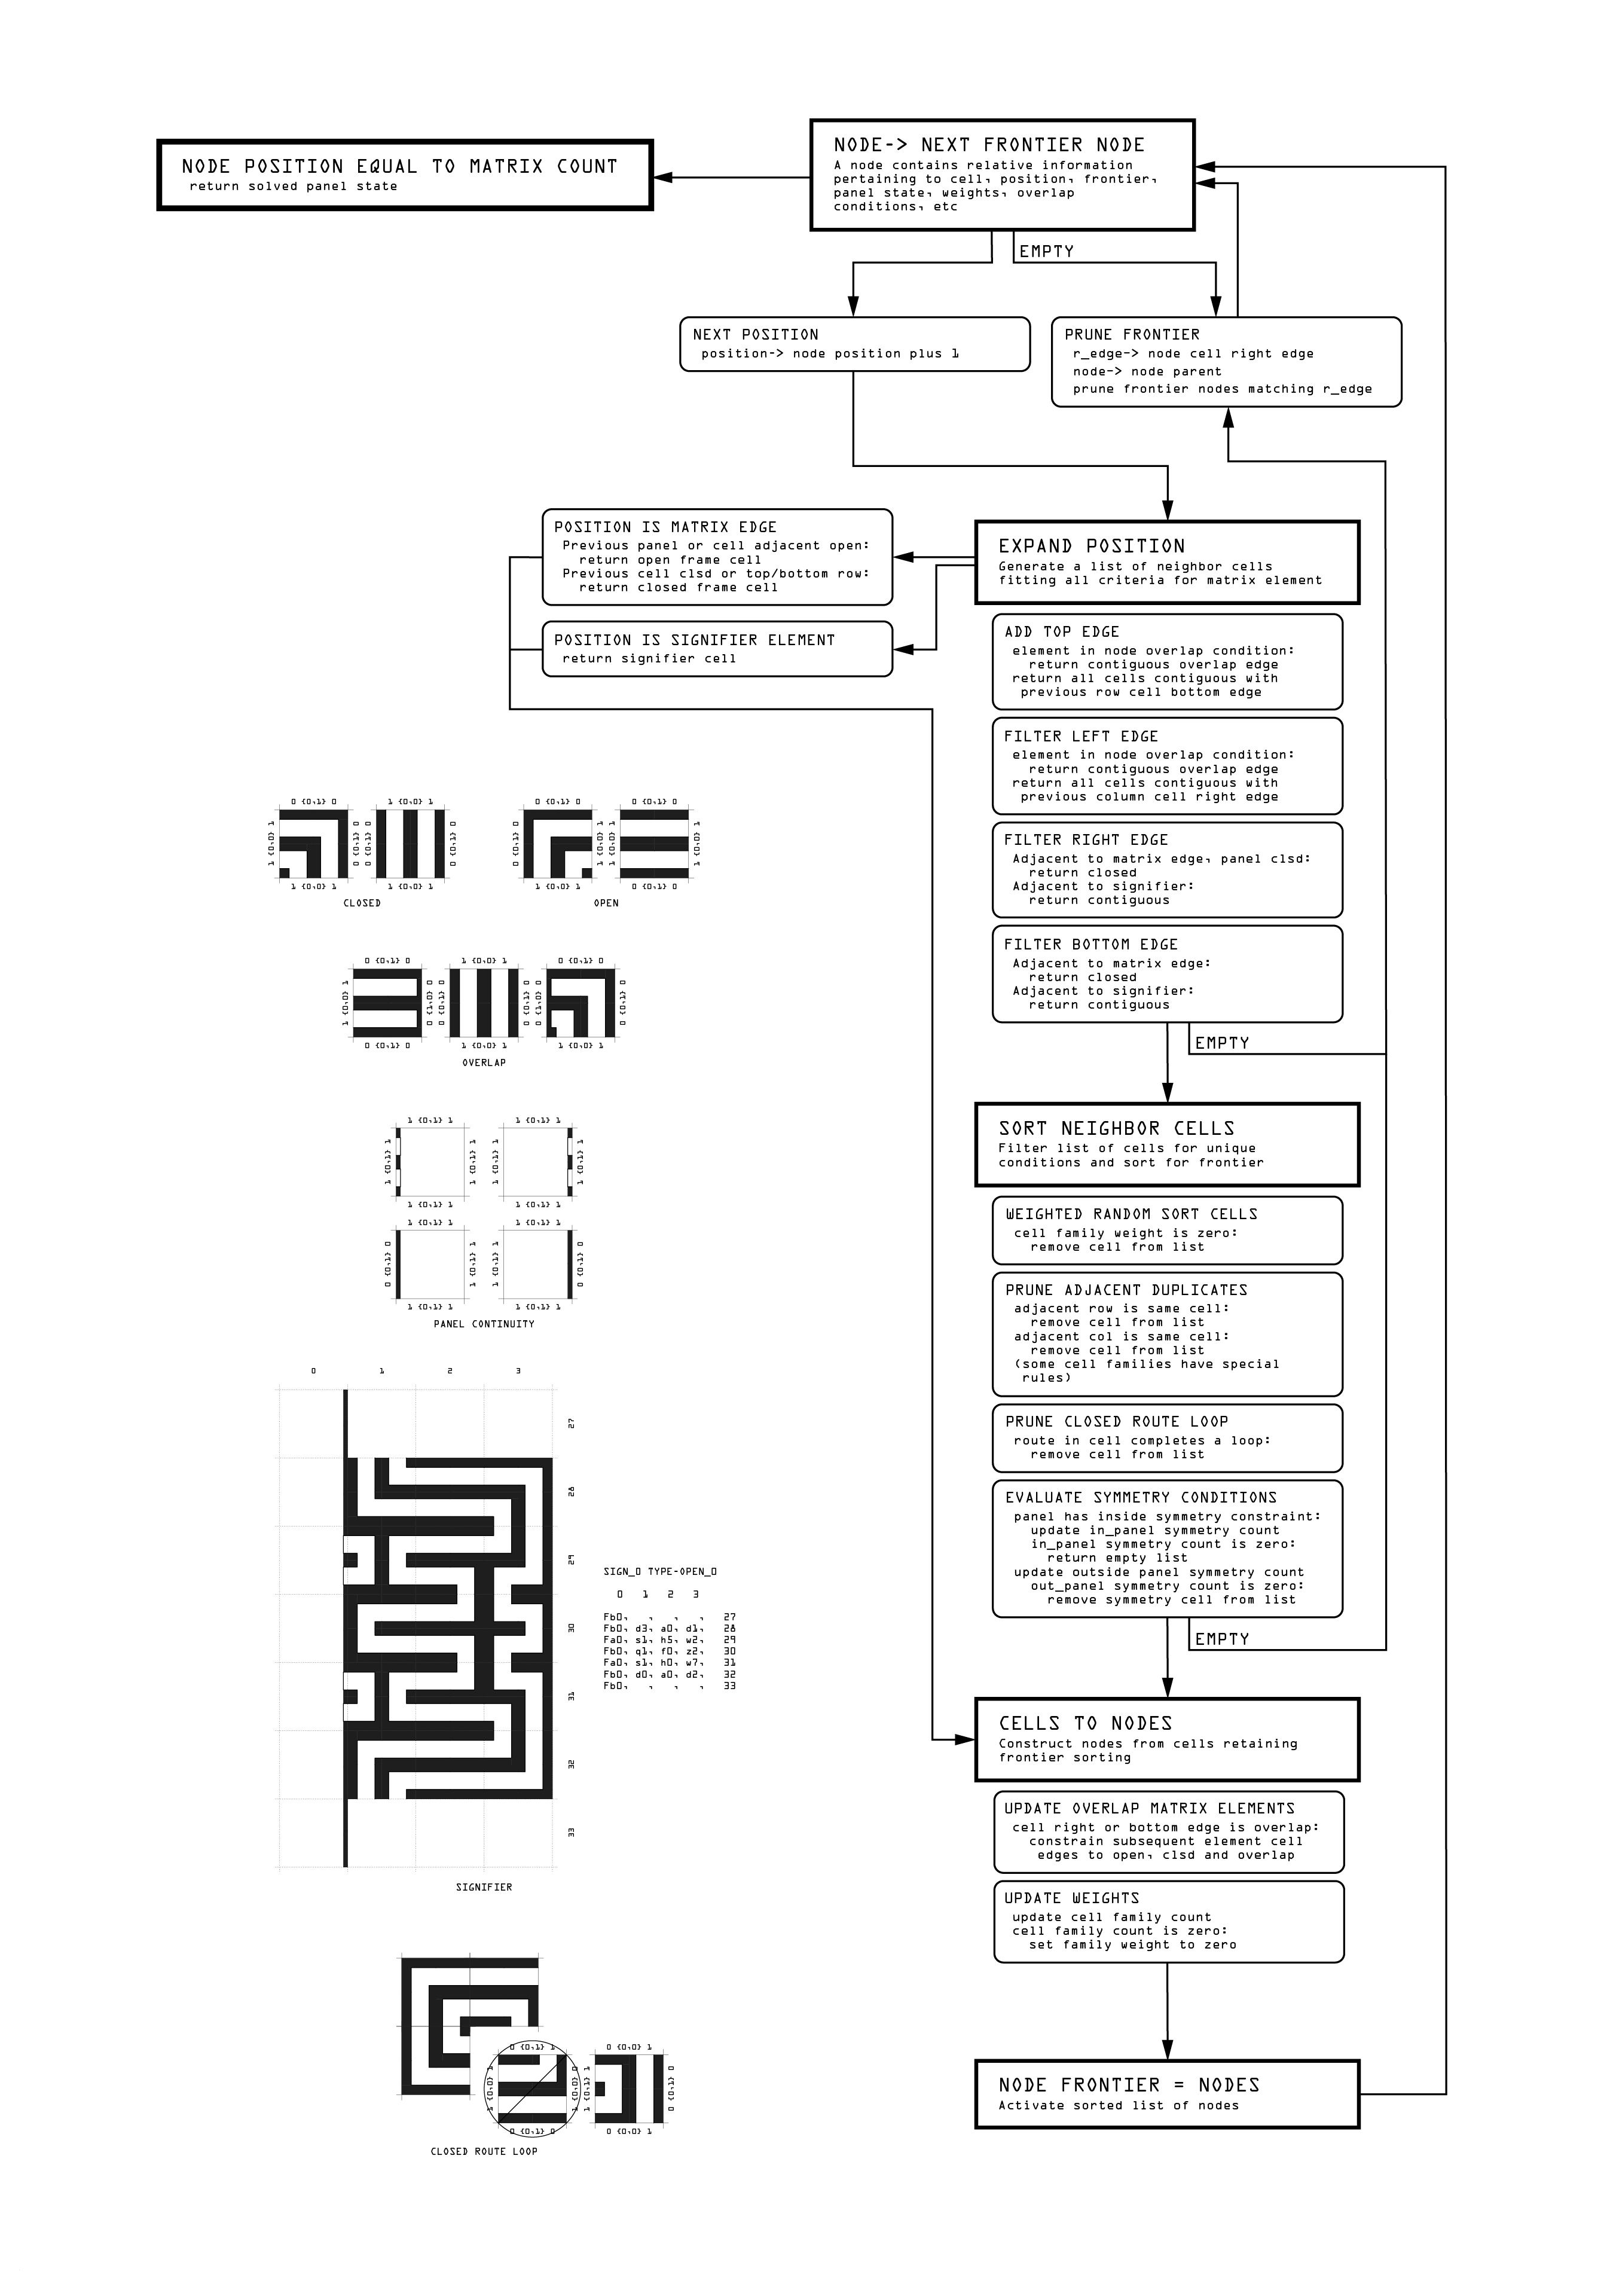 Diagram of the Core A-Grid Artificial Intelligence Decision Processes, Plasticité+, An Implementation of Artificial Intelligence for the Design, Visualization and Digital Fabrication of a Referential Façade of Historical Chinese Art and Architecture, J.Travis Bennett Russett